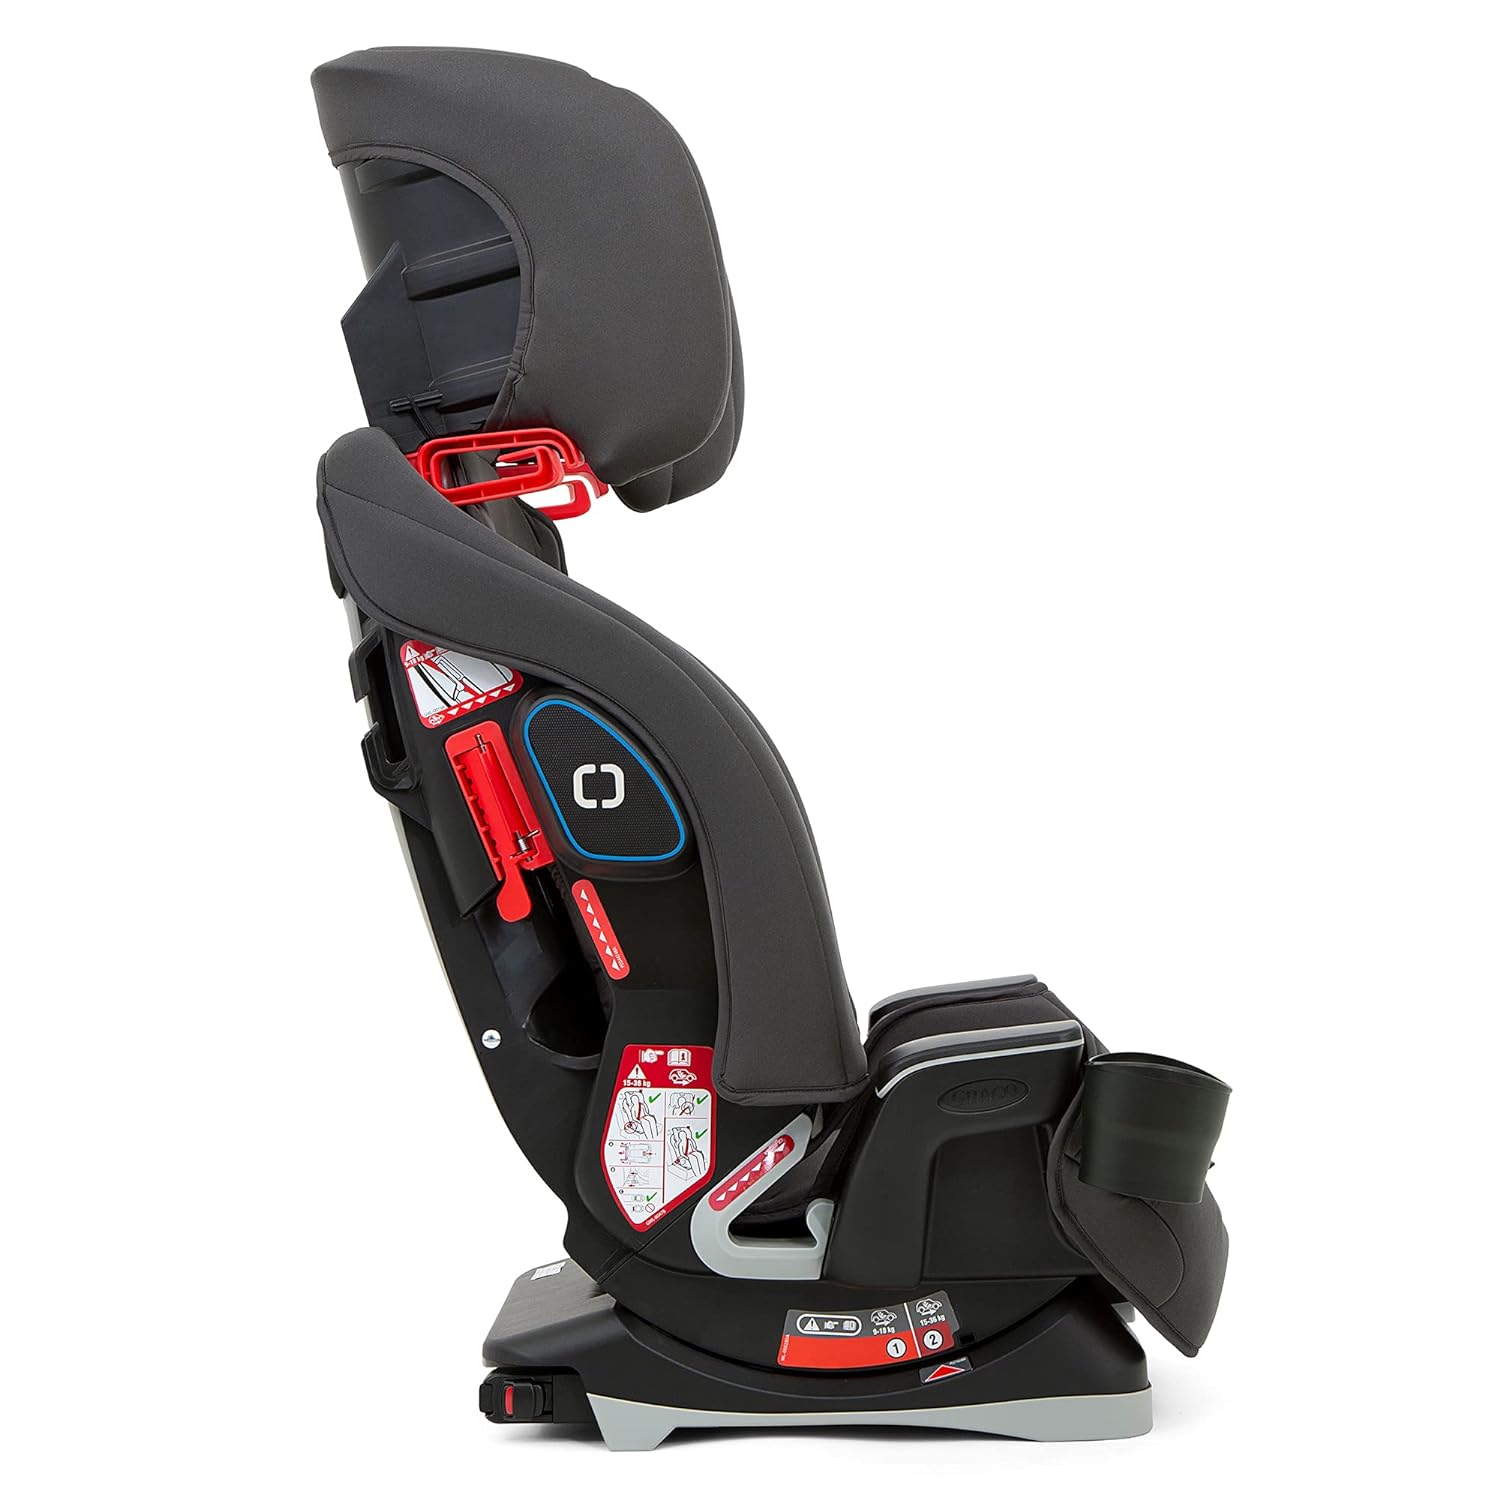 Graco Avolve Group 1/2/3 Child Seat with Isofix Car Seat from Approx. 1 Year to 12 Years (9 to 36 kg) 5-Point Harness Black